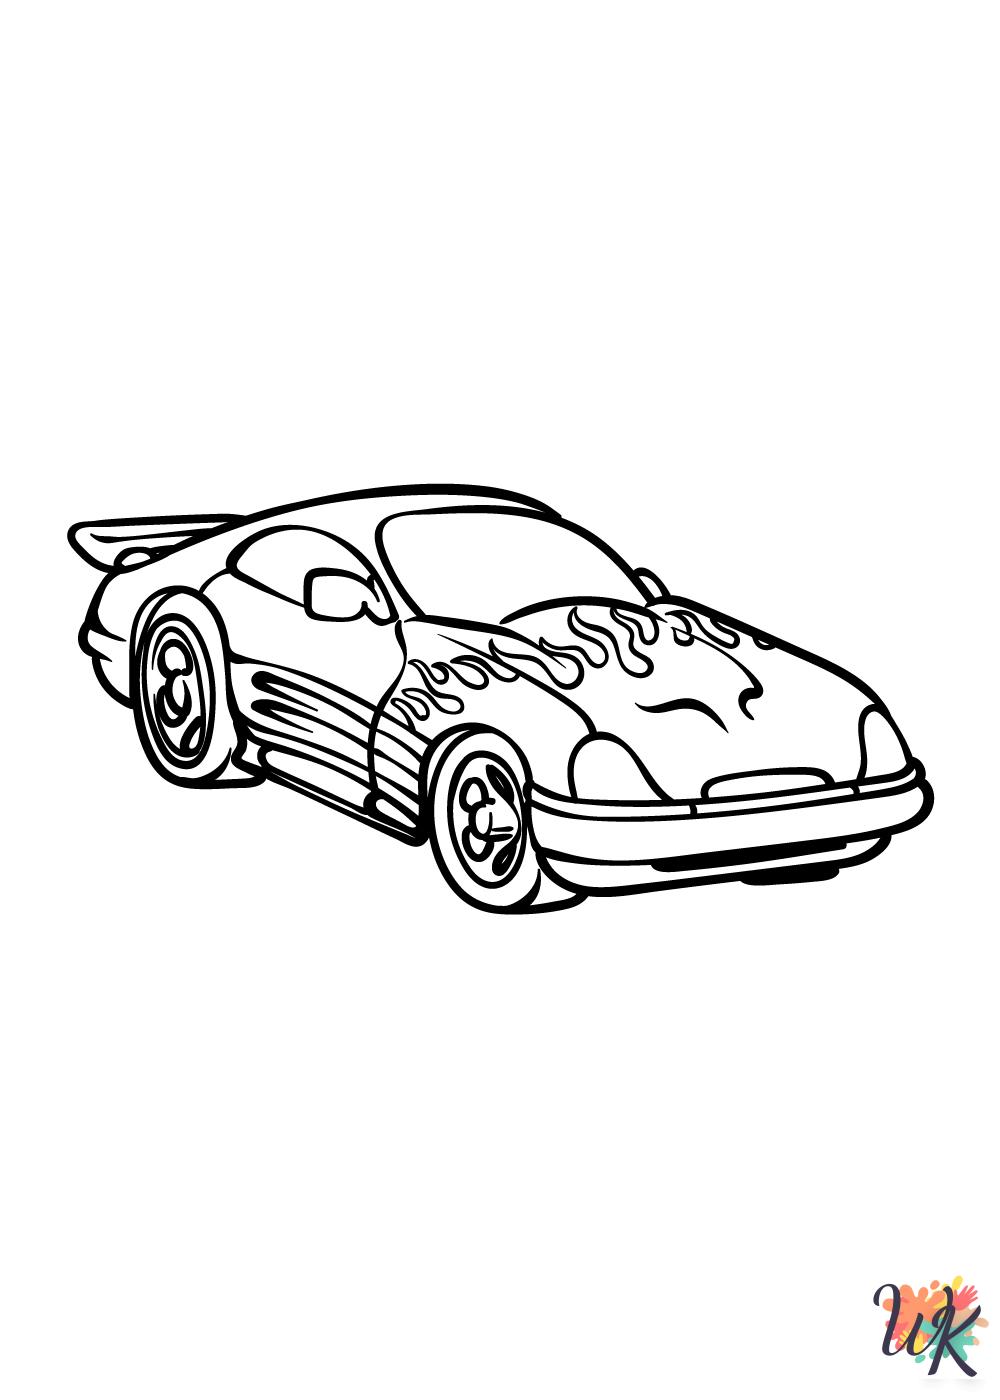 Race Car coloring pages free printable